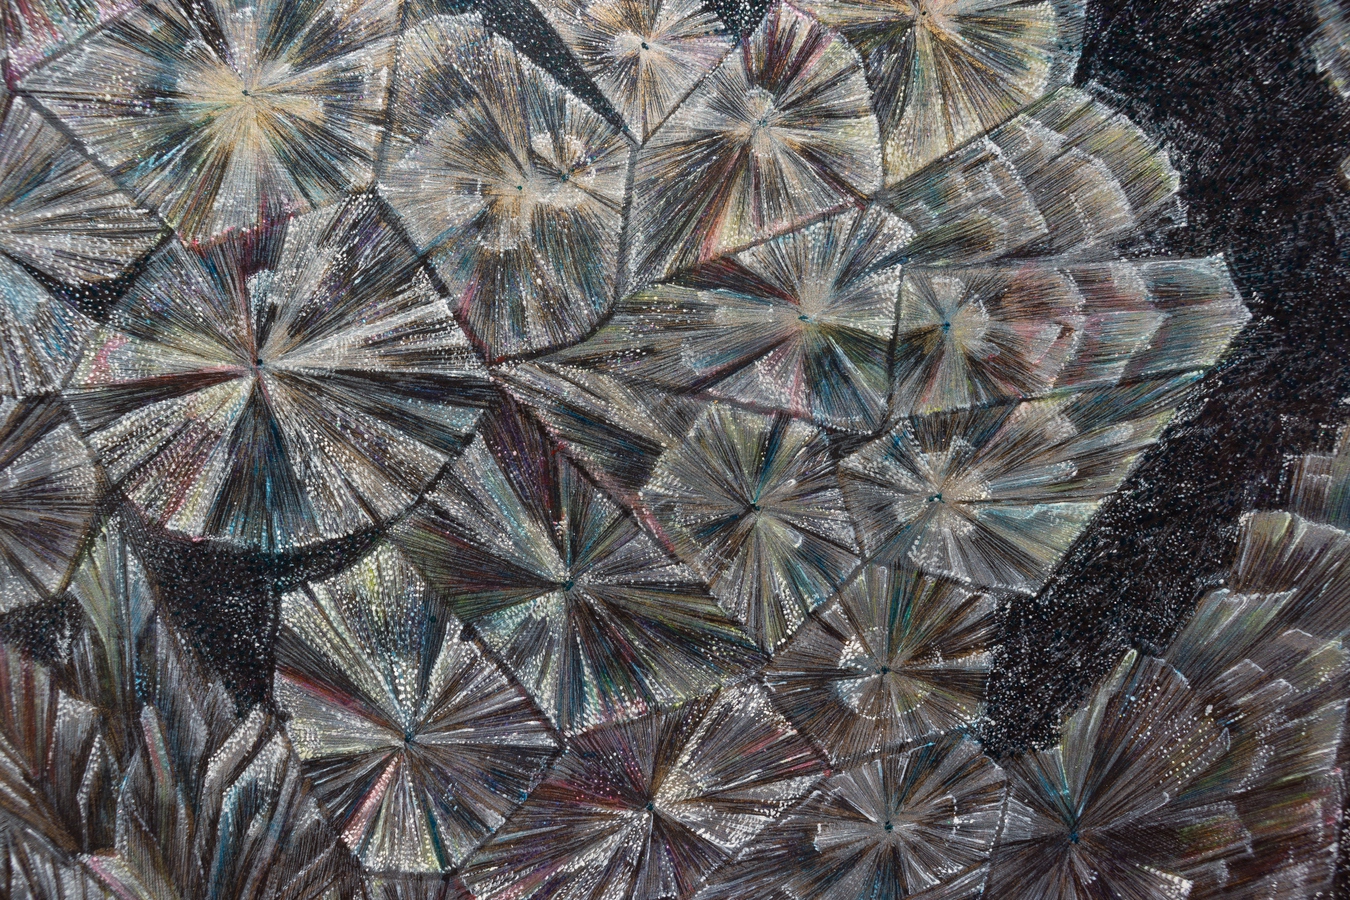 Image: Carol Ann Bauer, Crystals (D-L Aspartic) (detail), 1982. Acrylic on perspex. Photo by Lindsey de Roos.